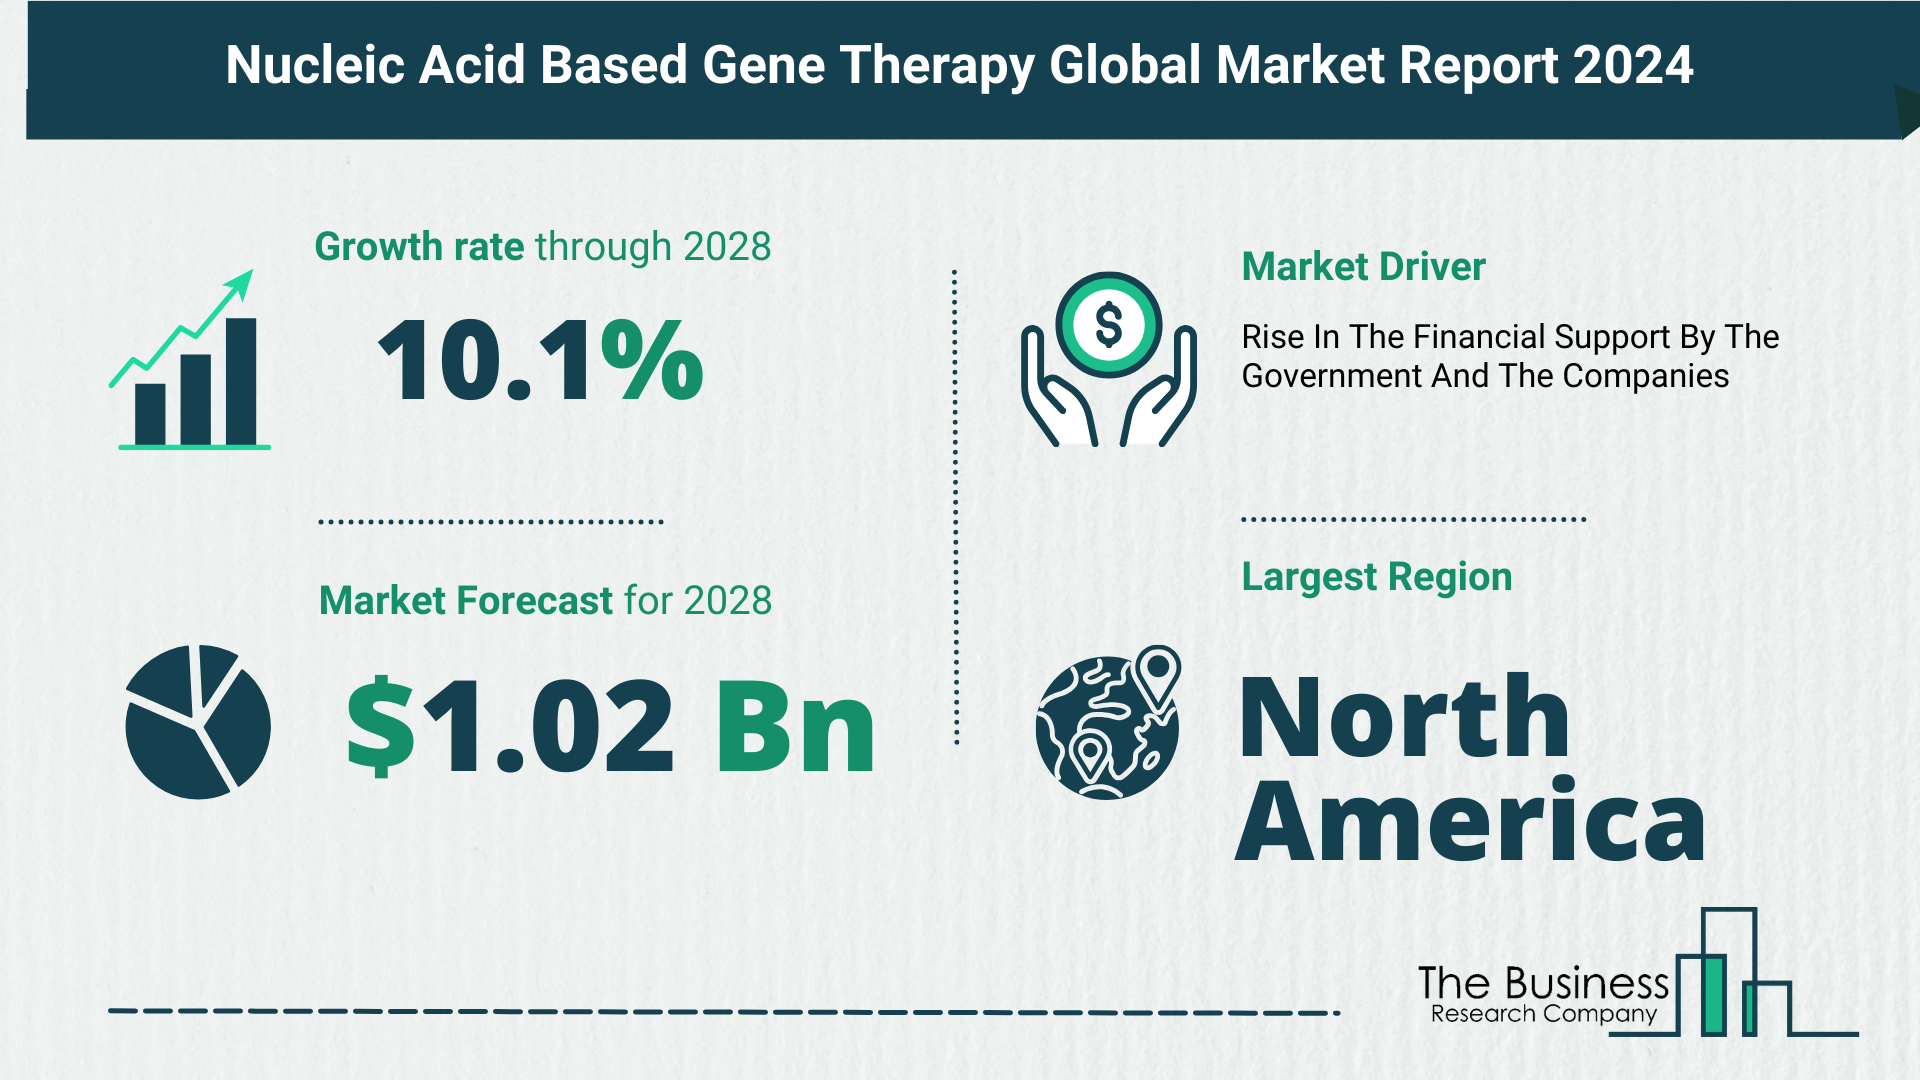 Global Nucleic Acid Based Gene Therapy Market